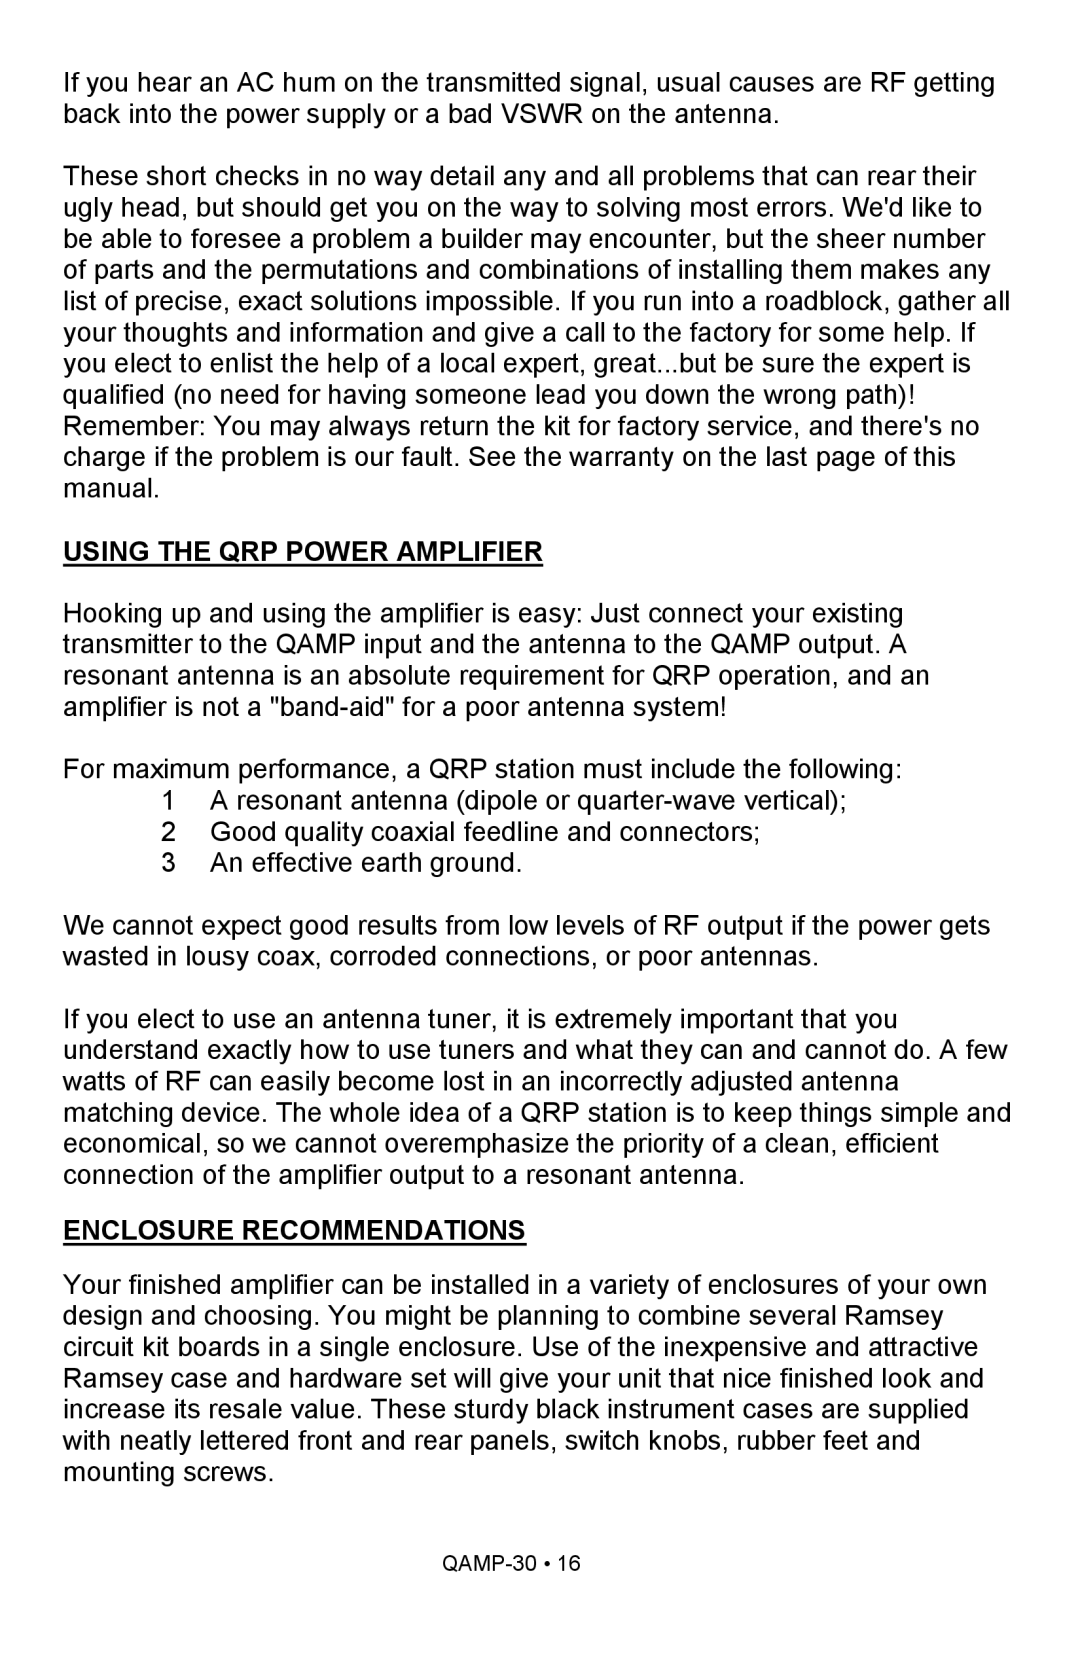 Ramsey Electronics QAMP30 manual Using The Qrp Power Amplifier, Enclosure Recommendations 